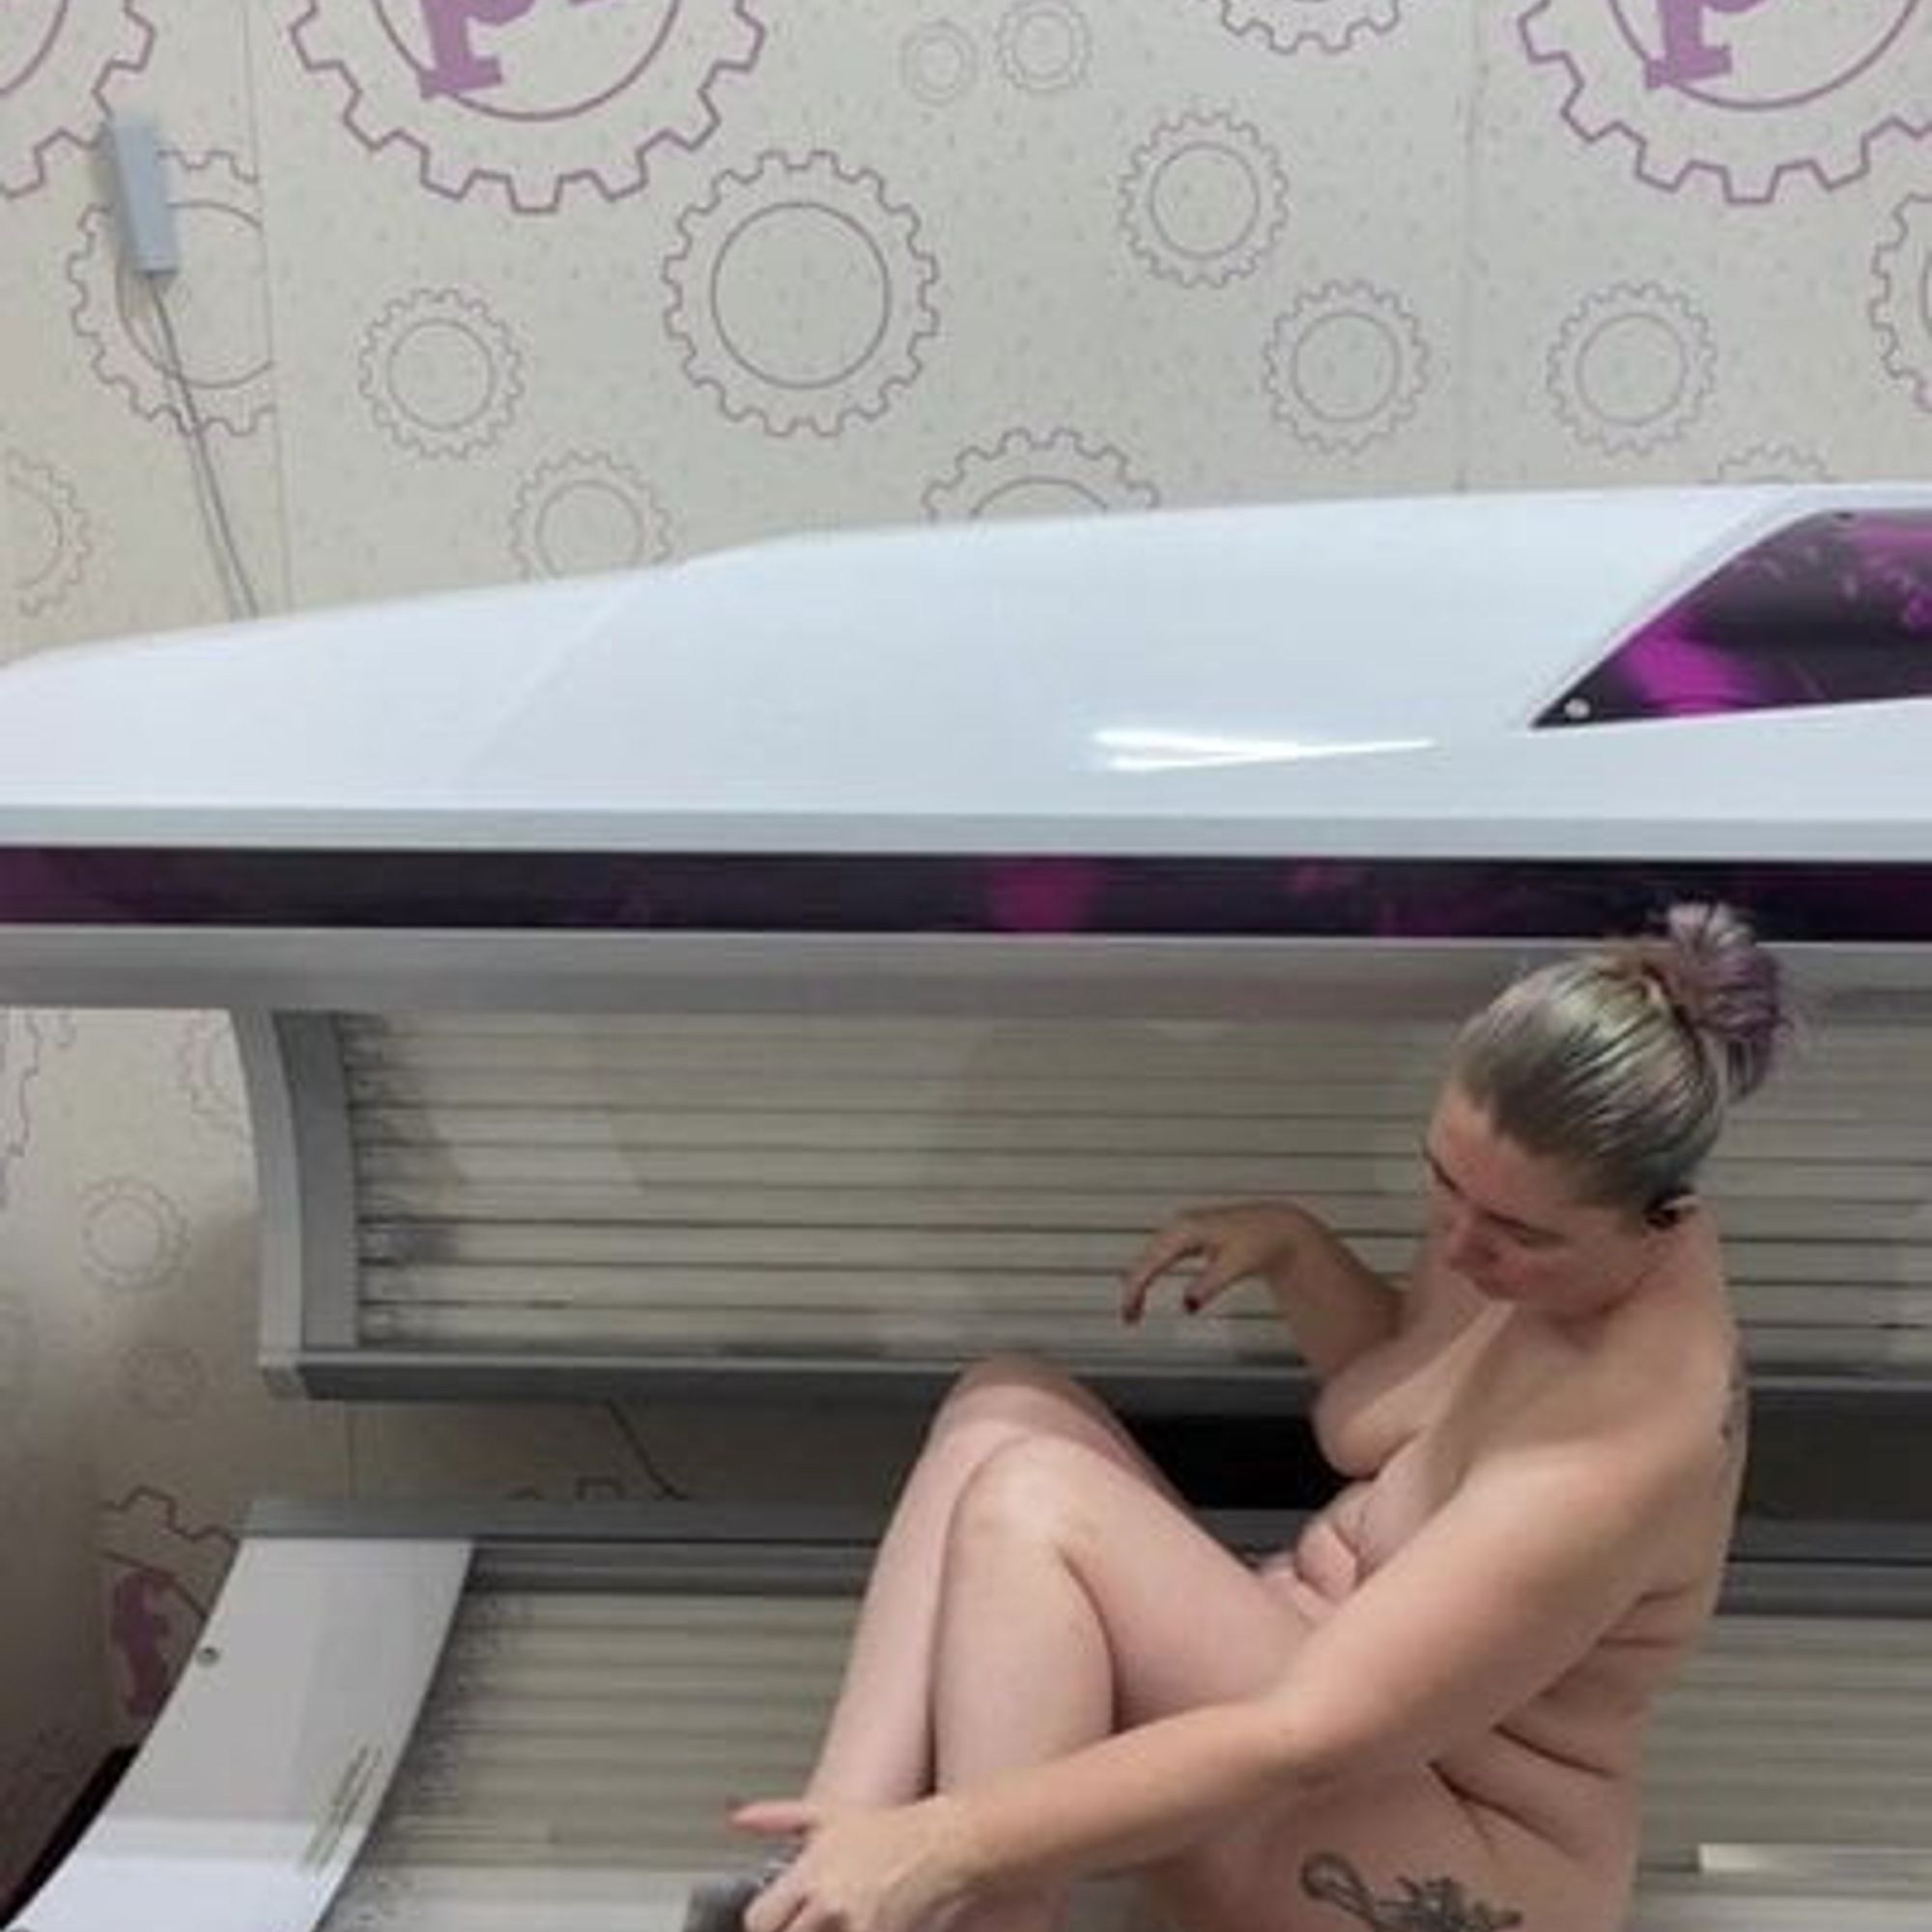 Camera in a tanning bed (81 photos) pic